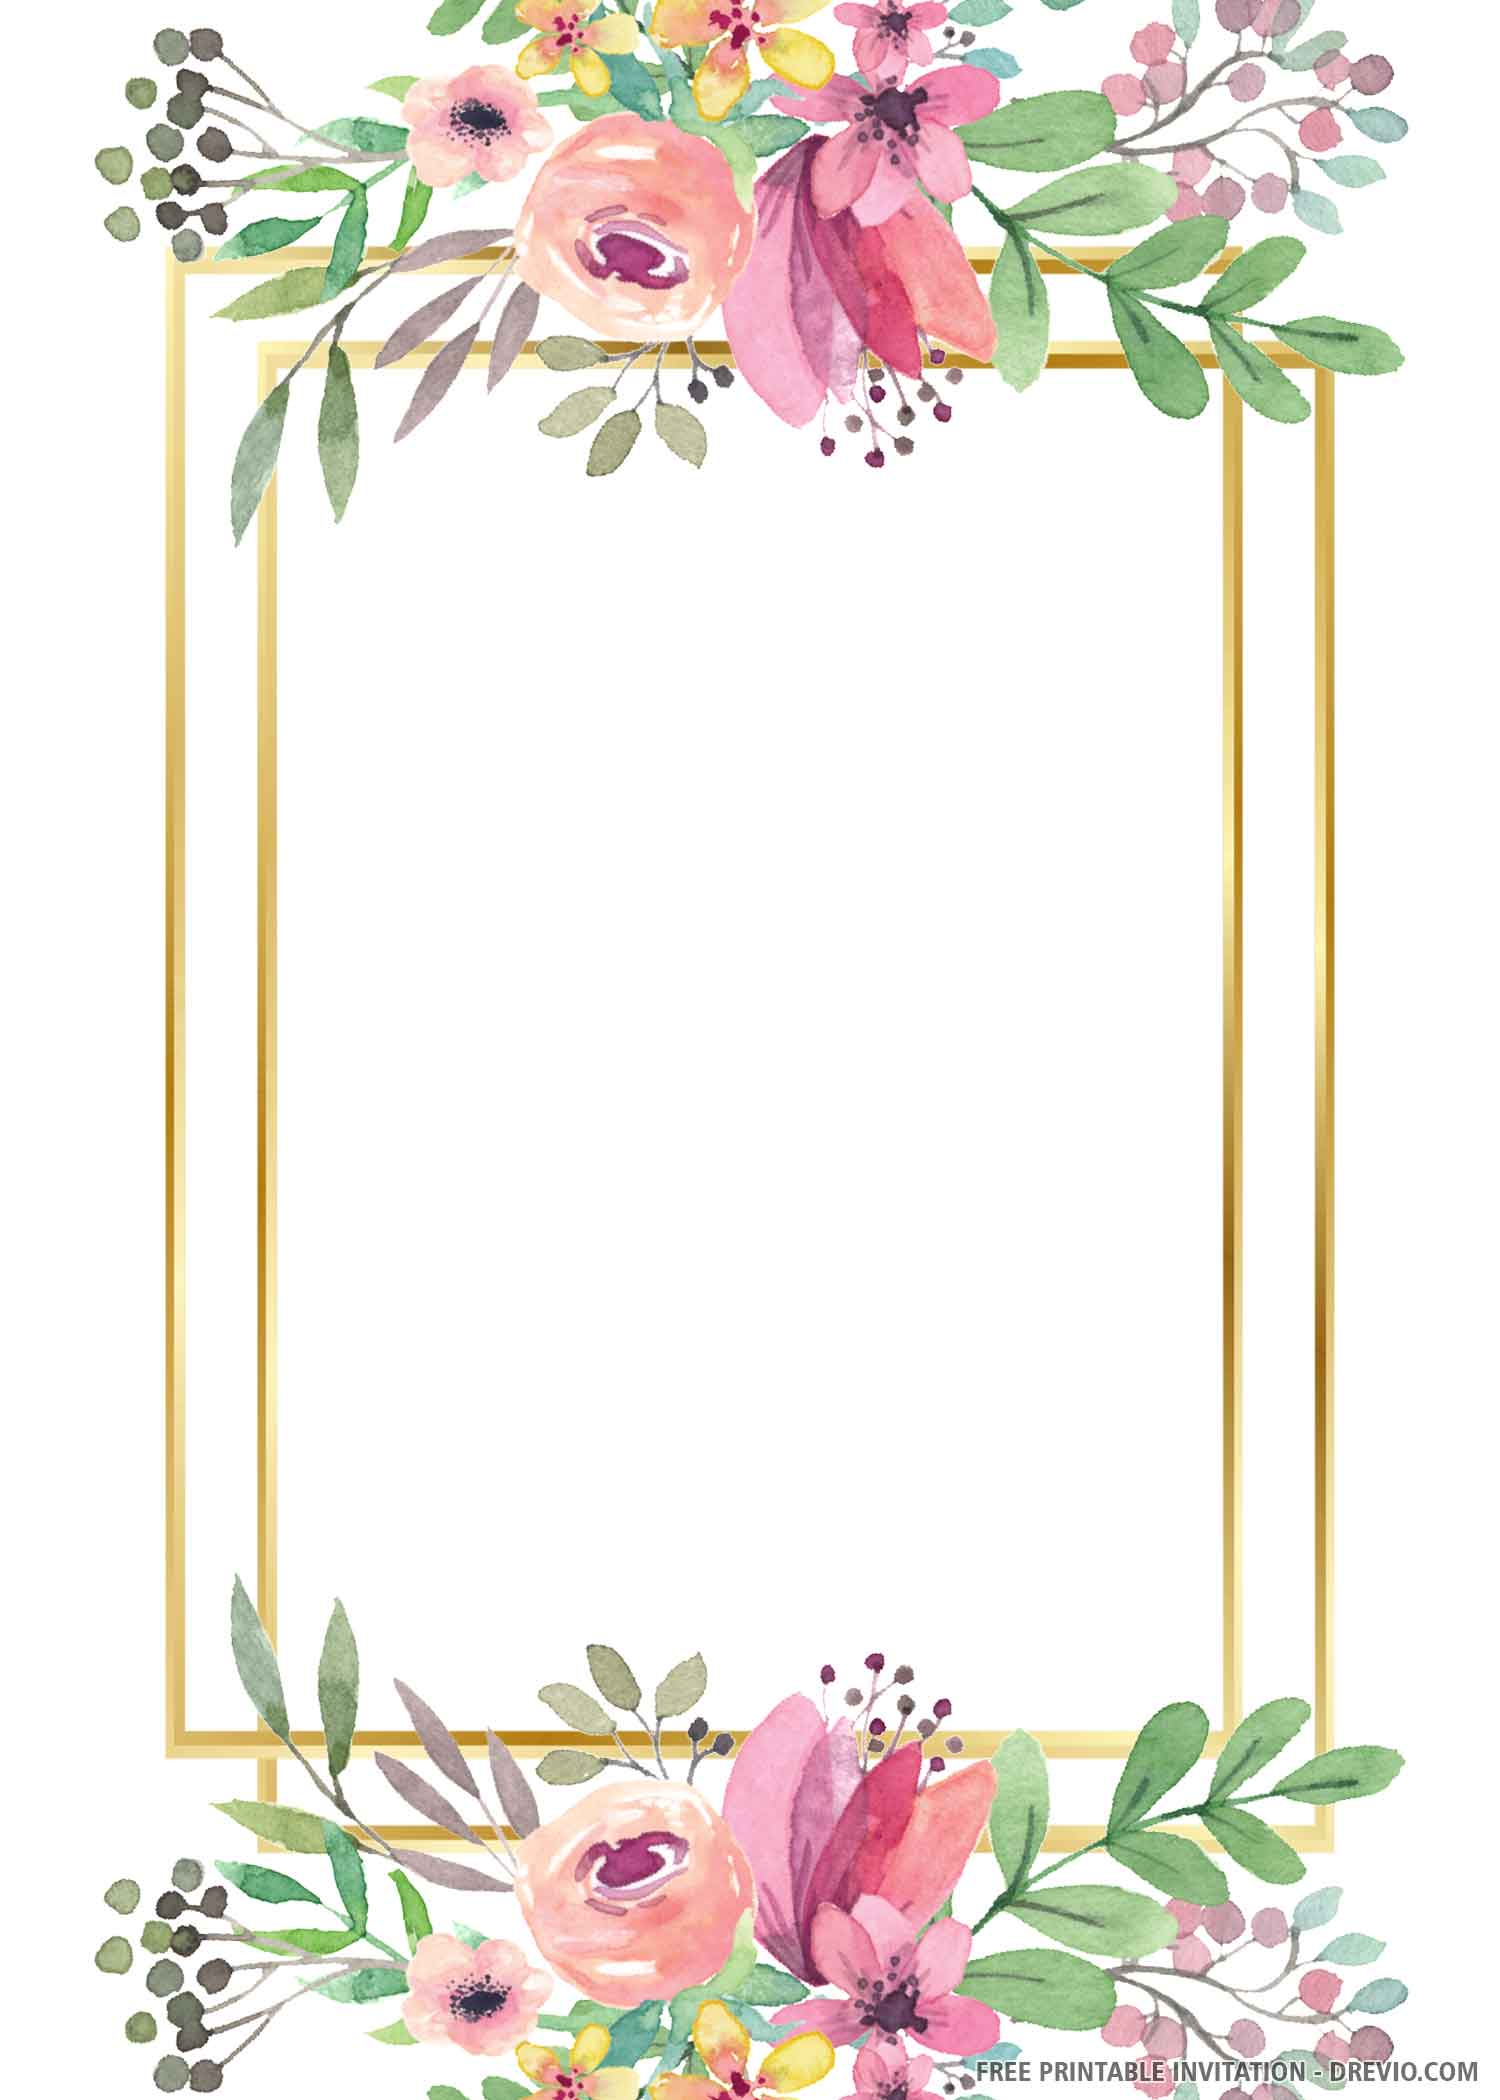 FREE PRINTABLE) Gold Wedding Invitation Template  Download In Blank Templates For Invitations